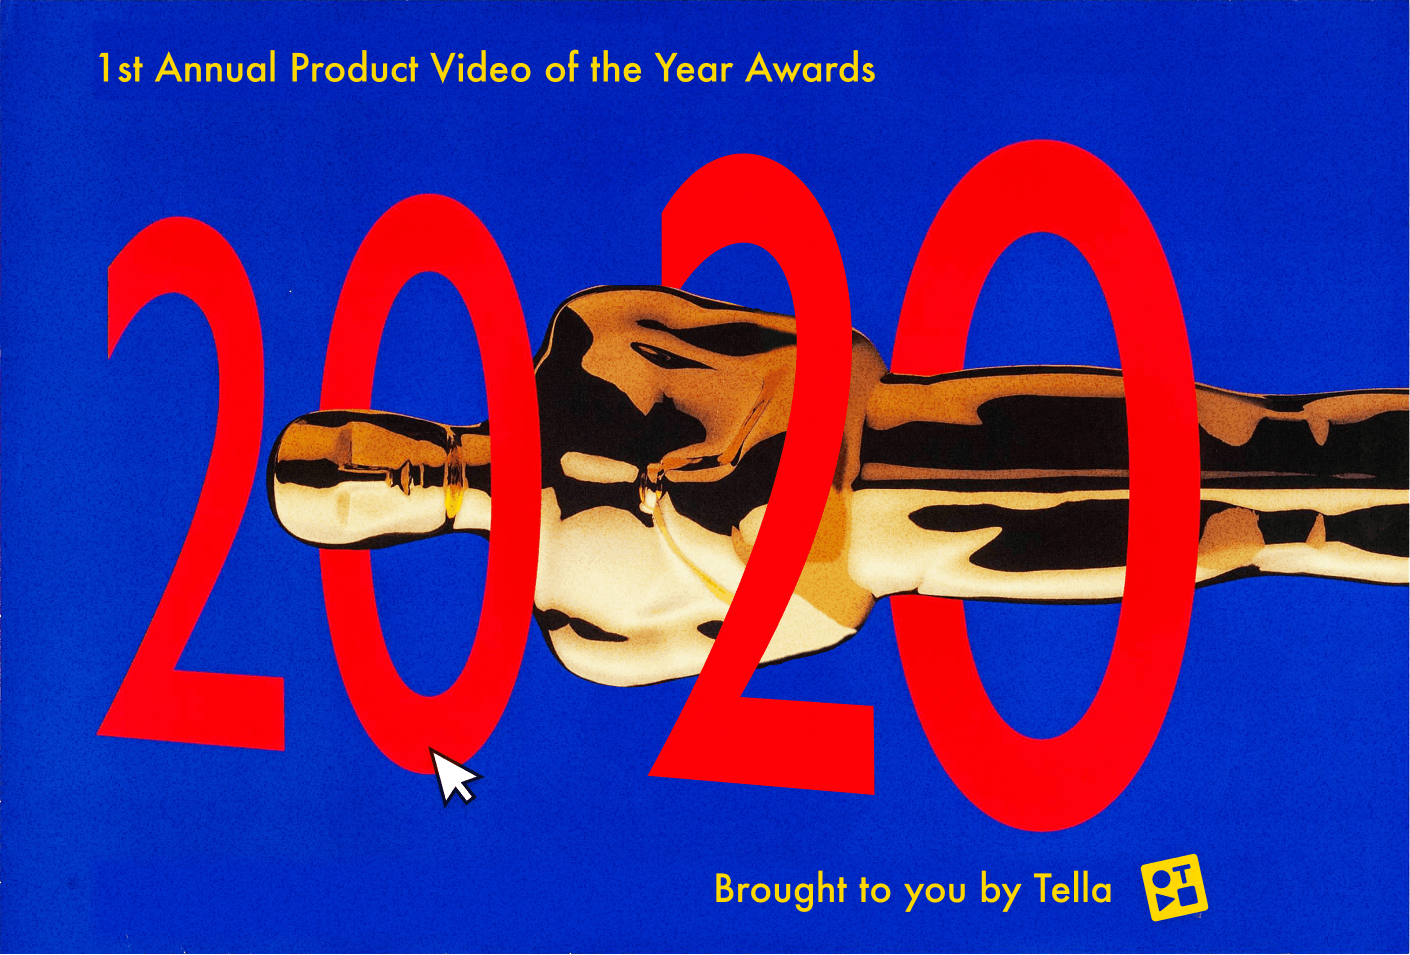 1st Annual Product Video of the Year Awards 2020